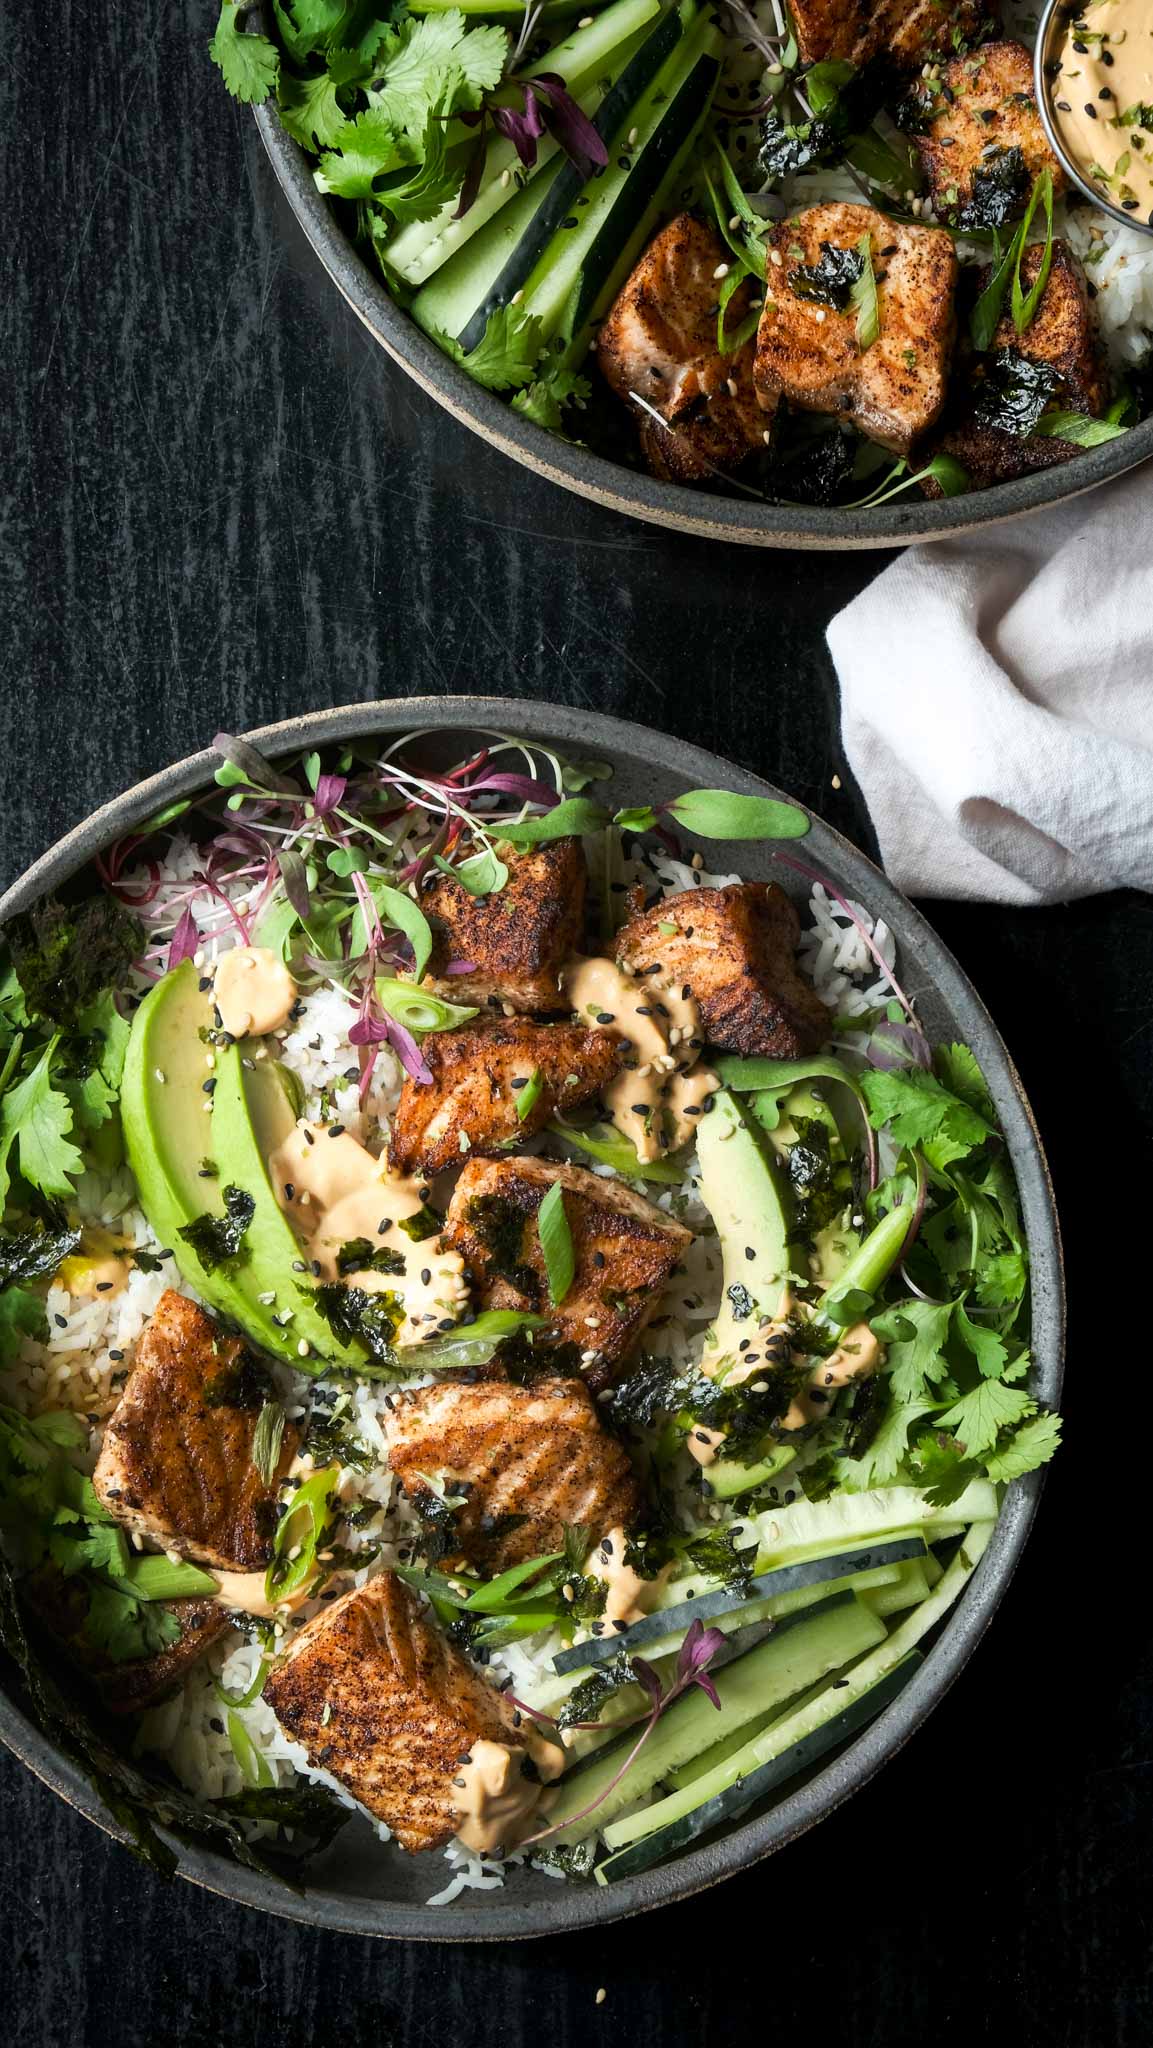 Canned salmon rice bowl recipe